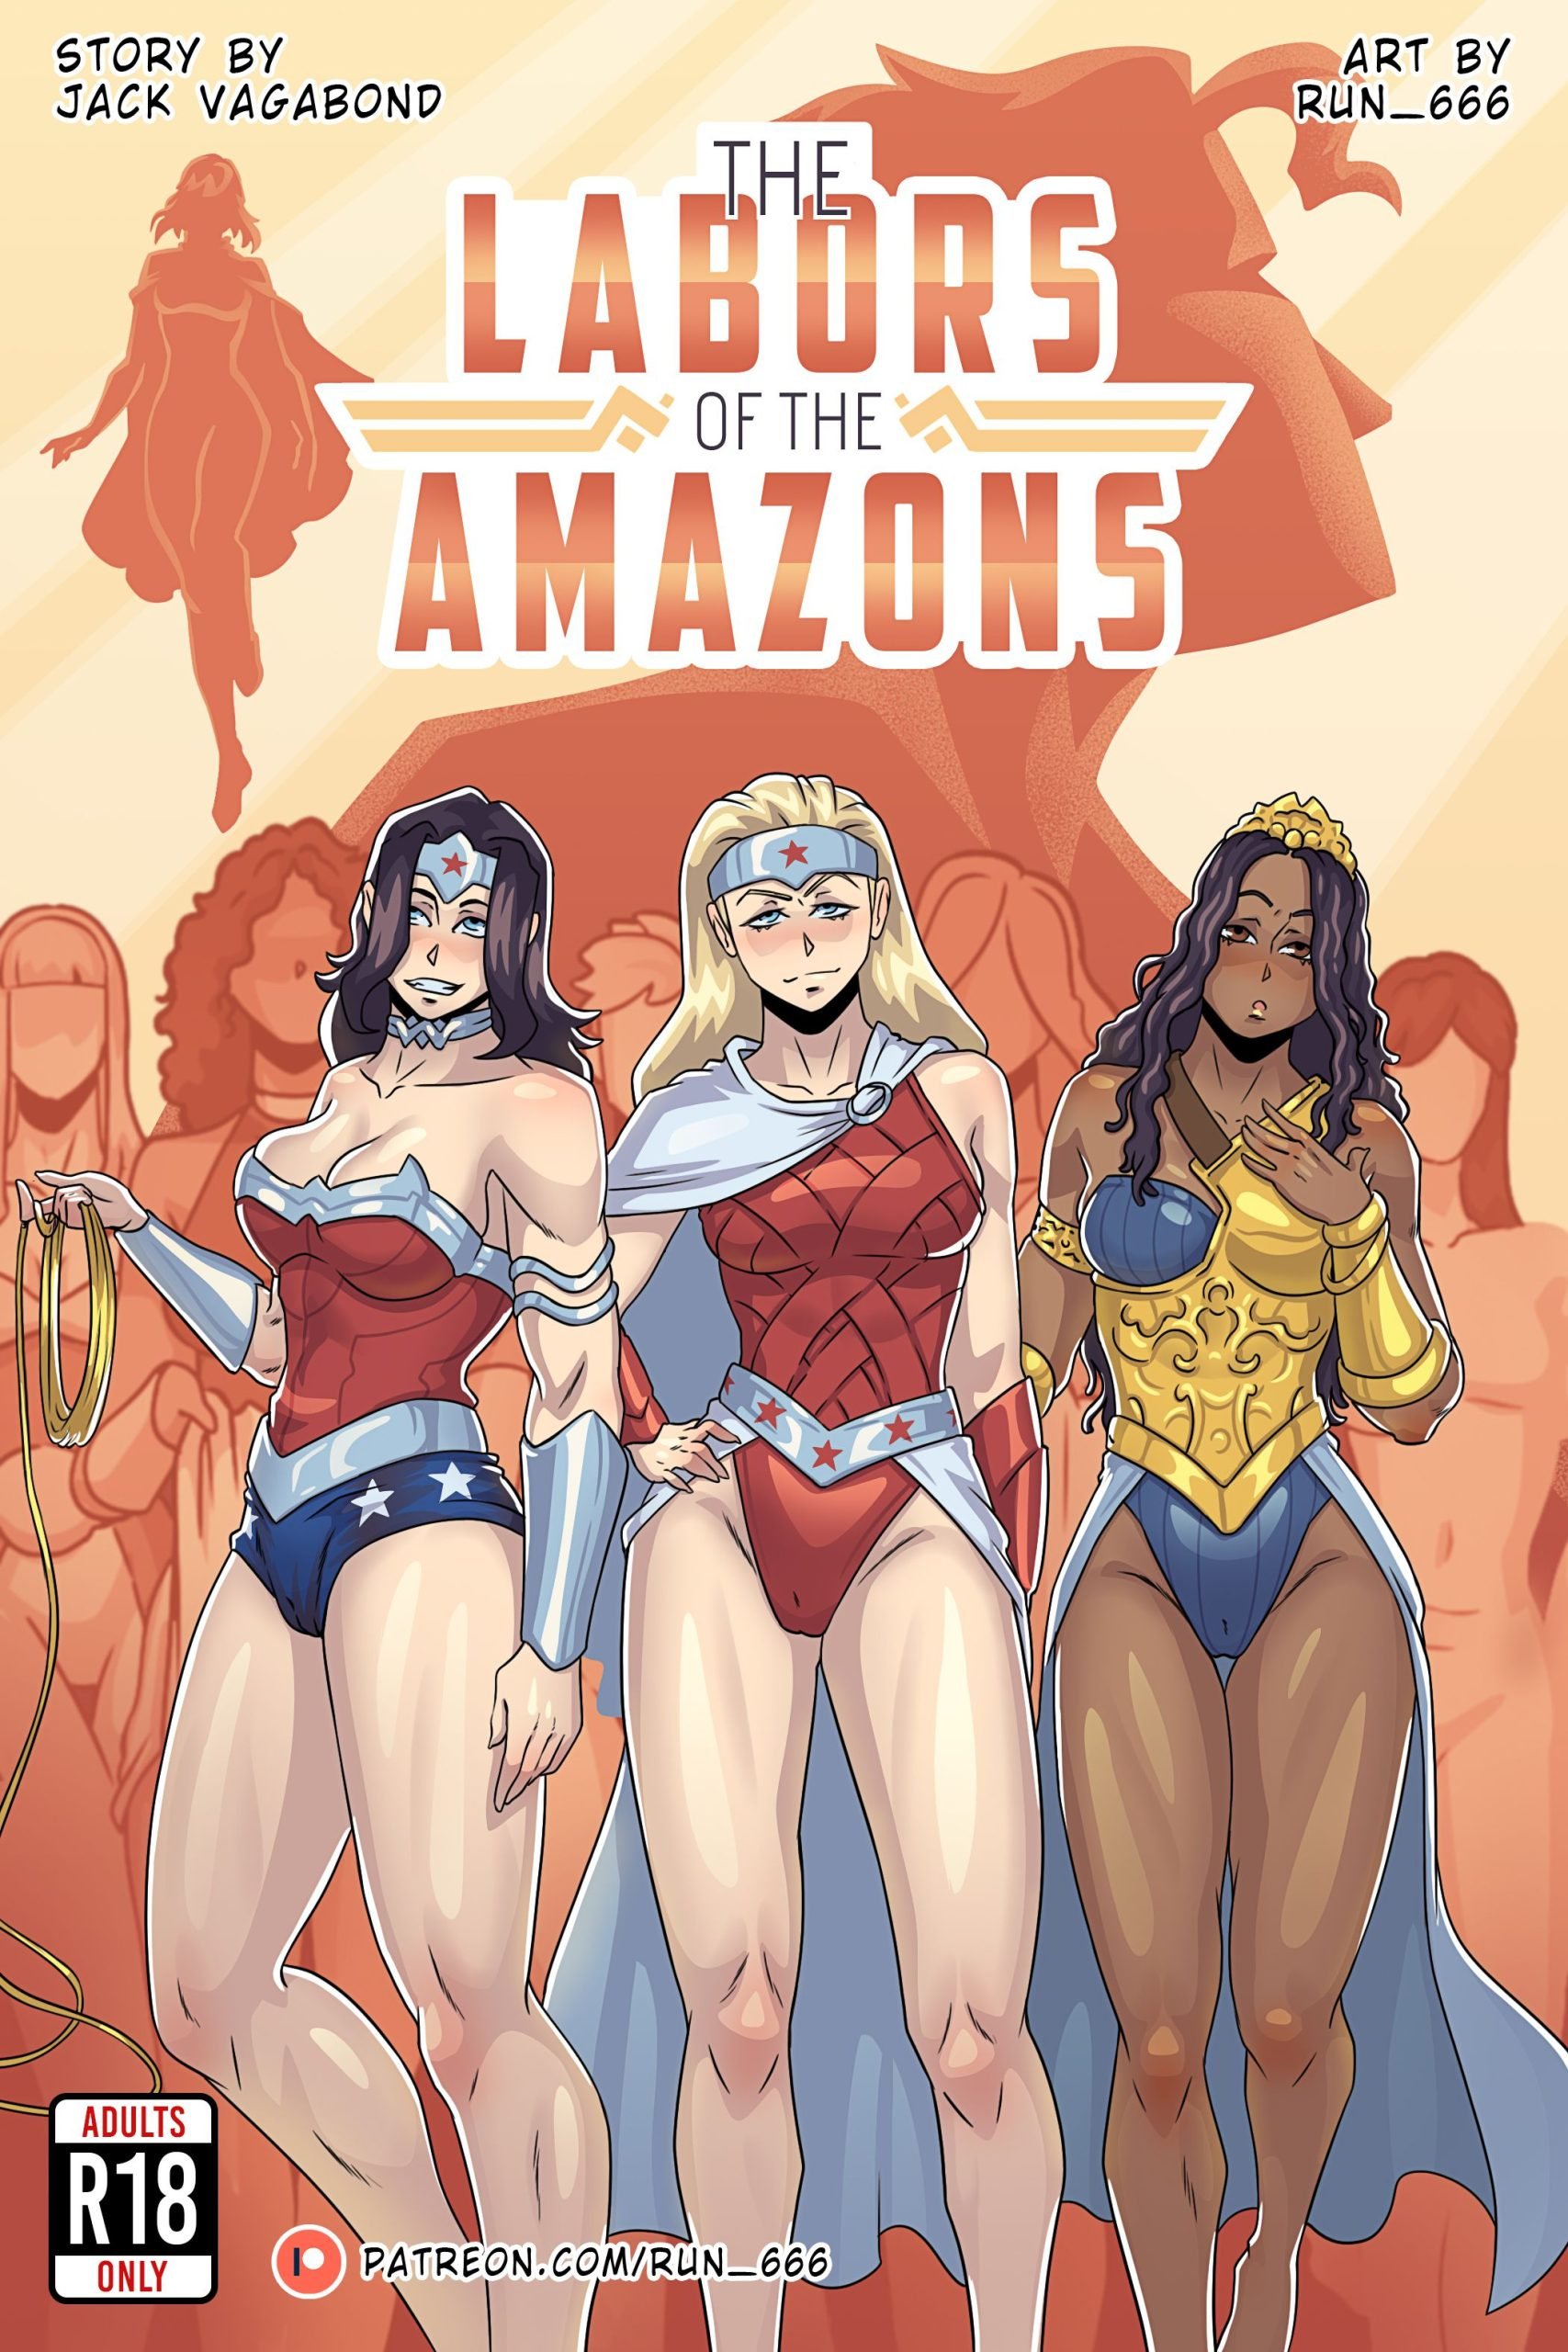 The Labors of the Amazons (Wonder Woman) Run 666 - 1 